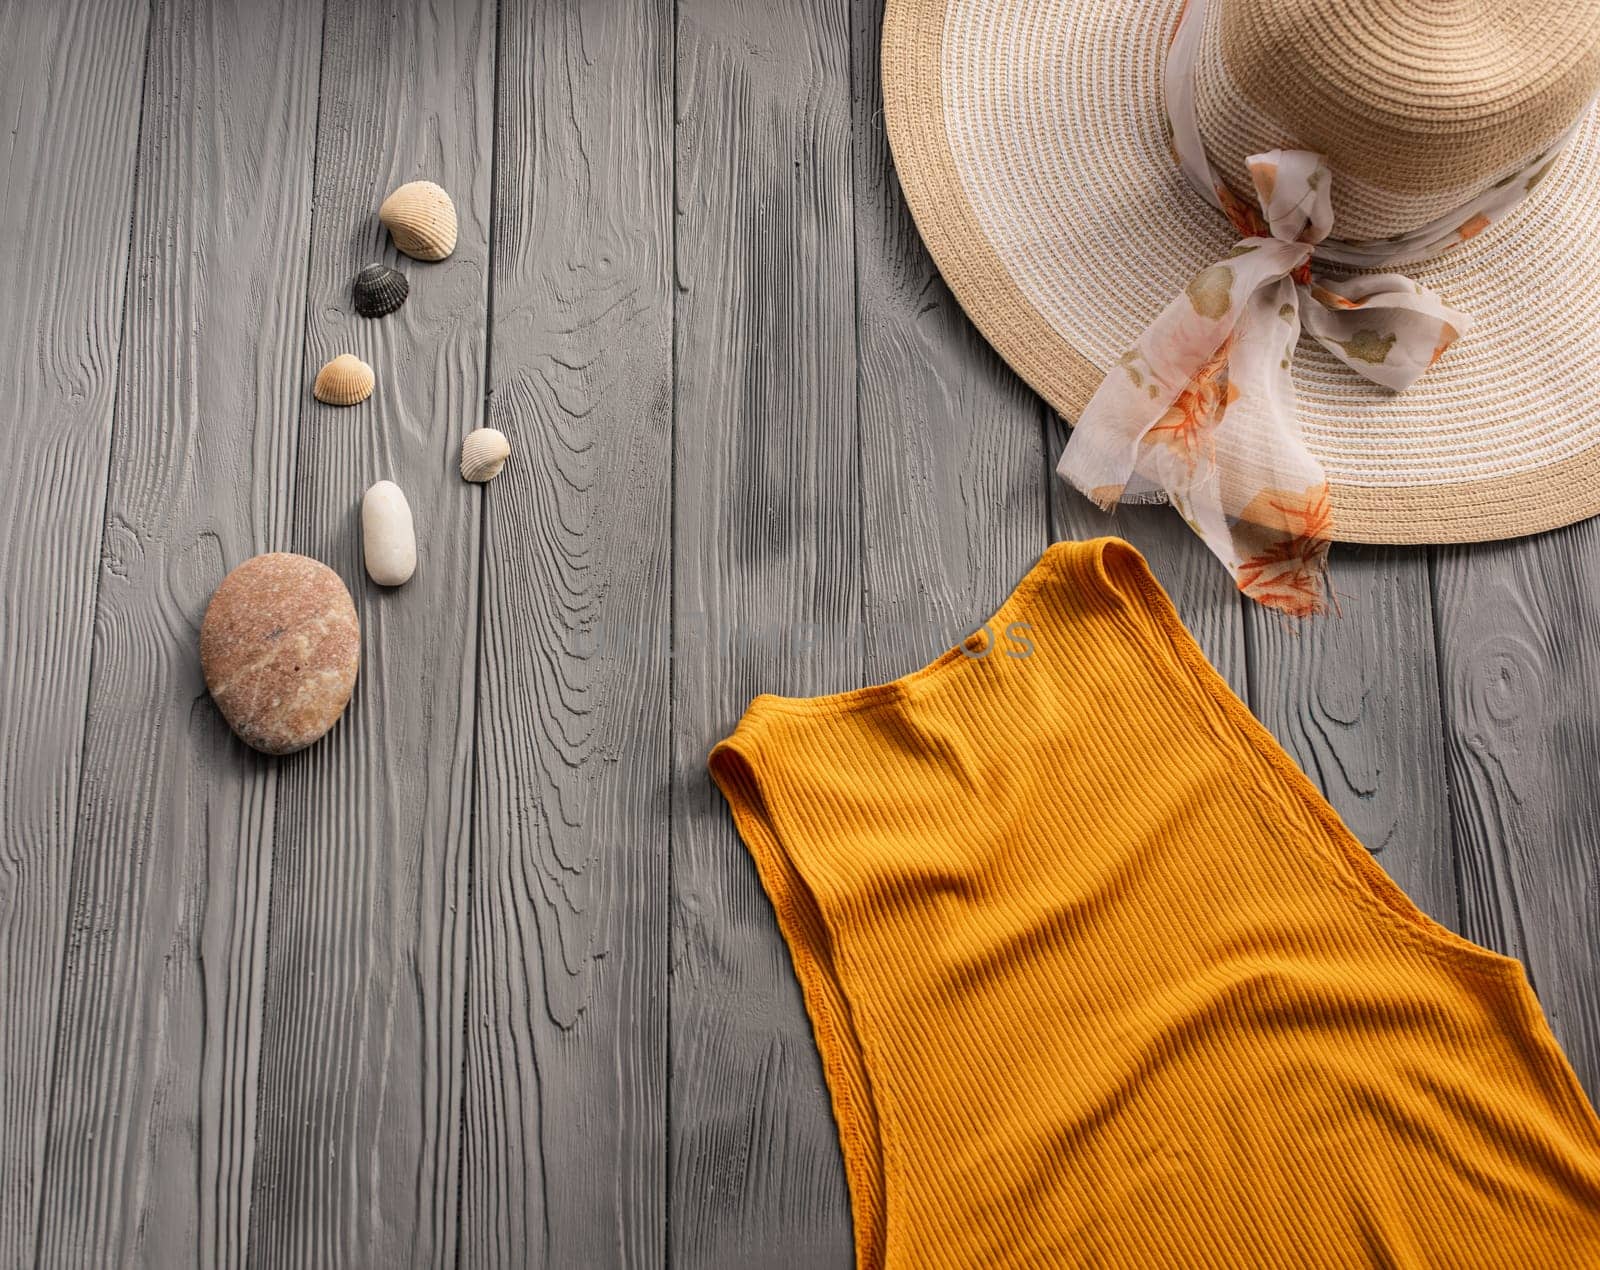 beachwear orange woman top outfit hat bag sun protection sunglasses pebbles. Summer background template mockup free space composition sample text. Top view above wooden background vacation concept